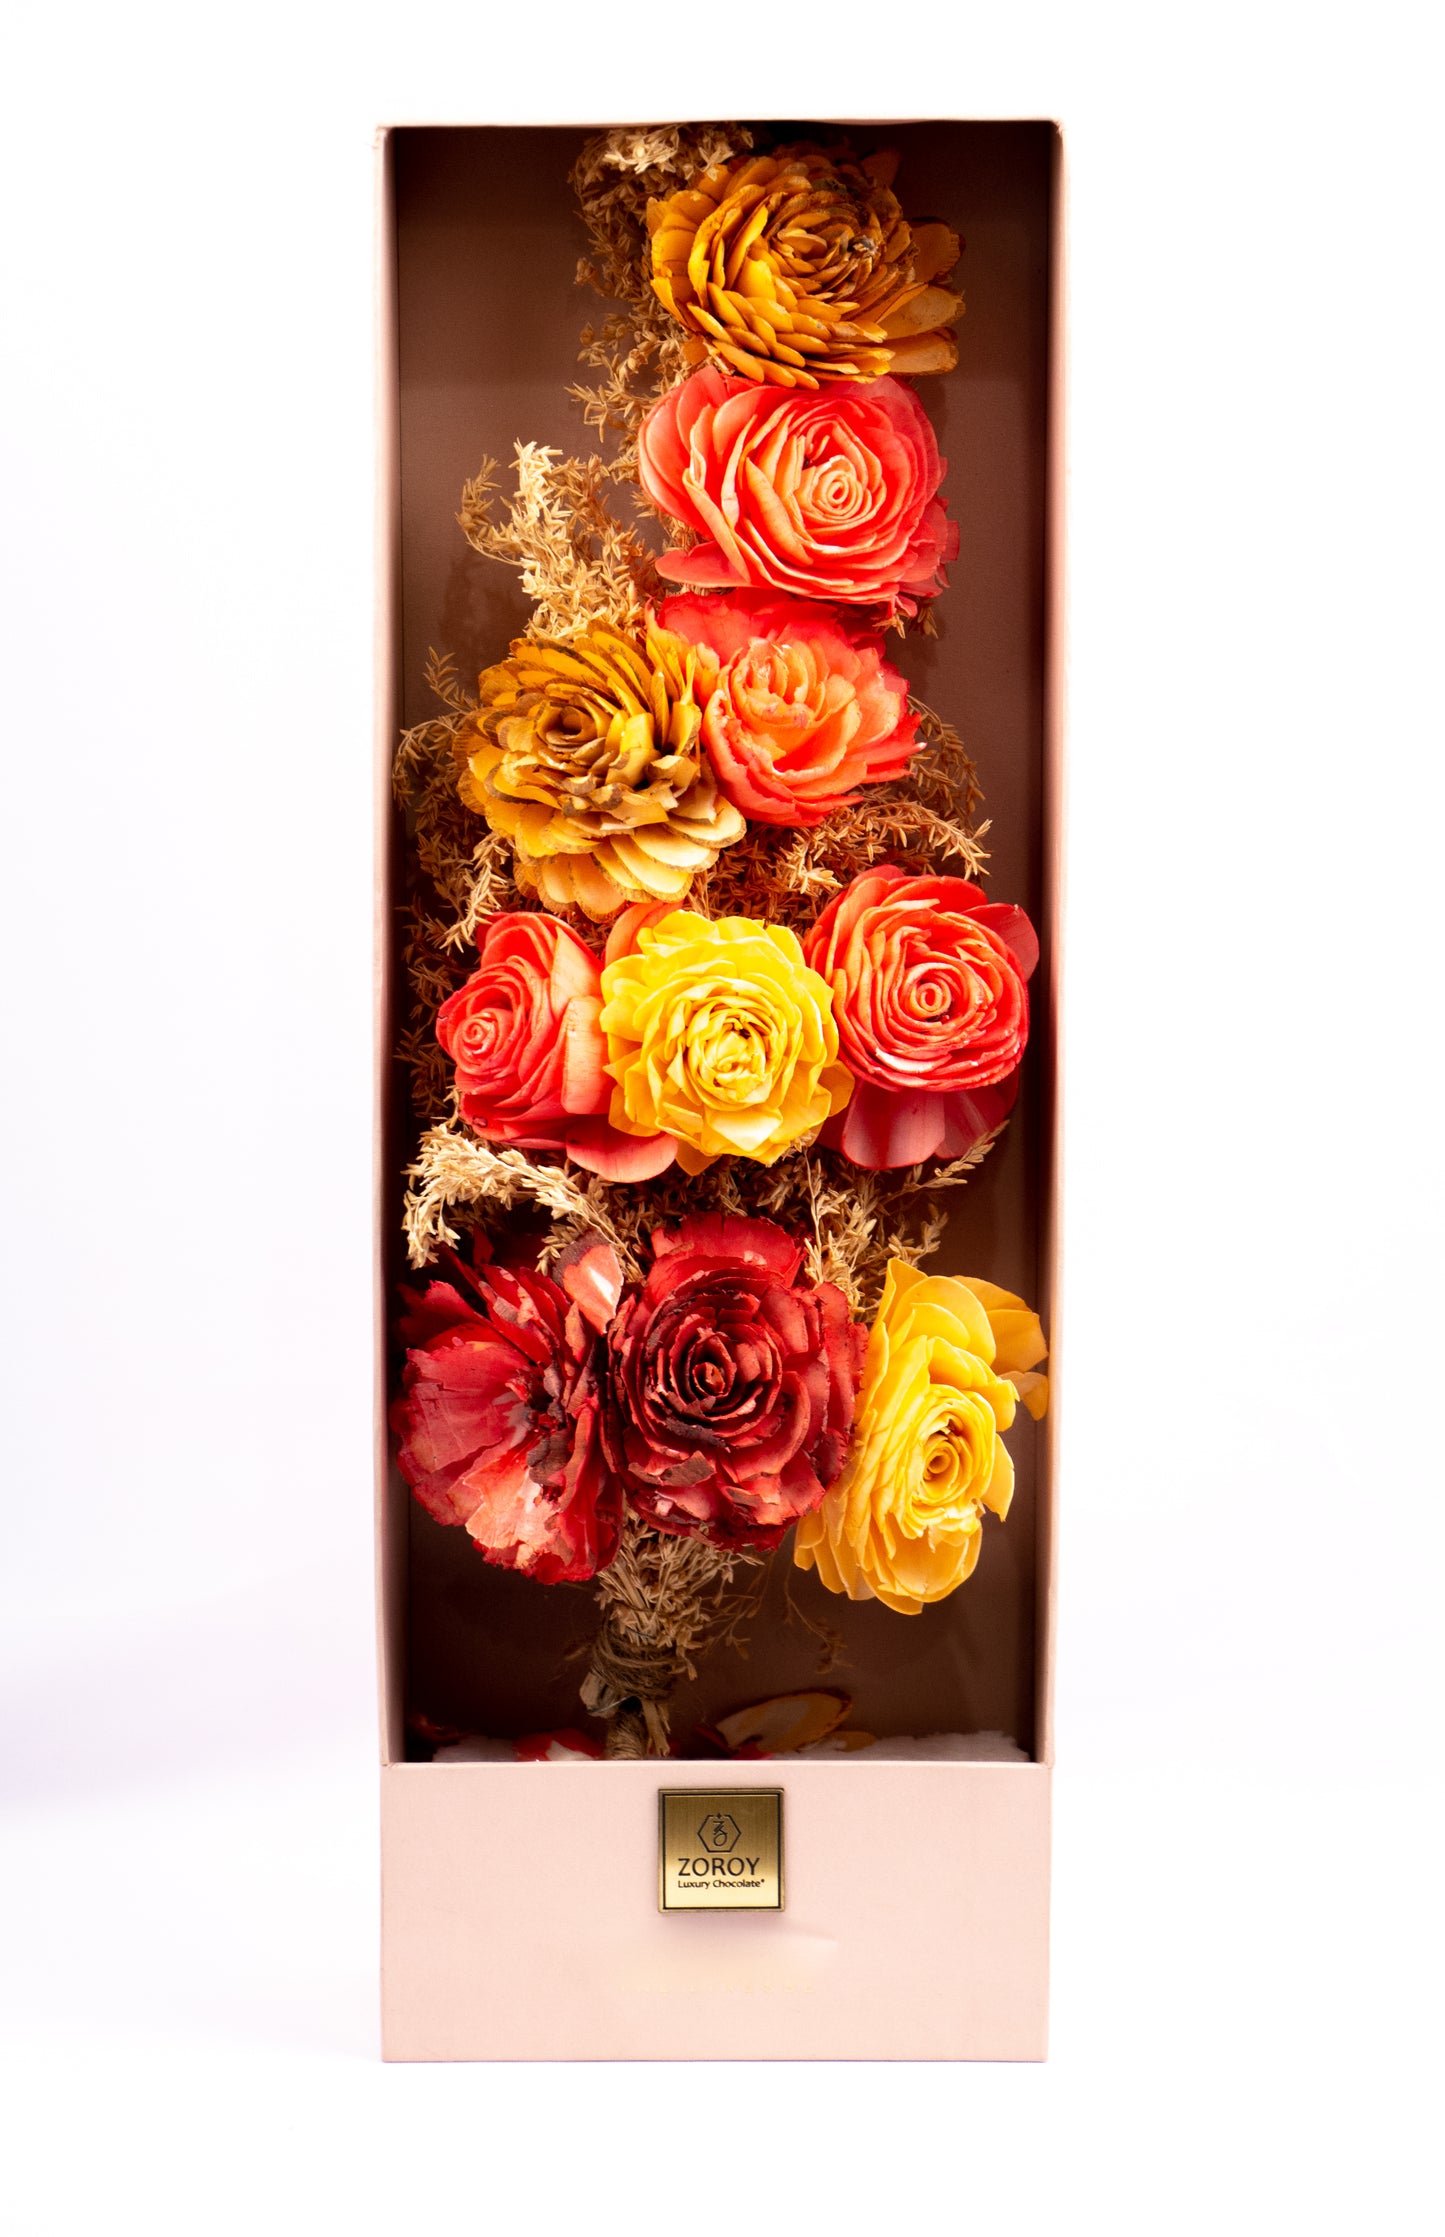 ZOROY The Finessee Dry flower bouquet in box for any ocassion | 10 flowers Bunch arrangement for Gifting & Home Decor | Multicoloured floral Large